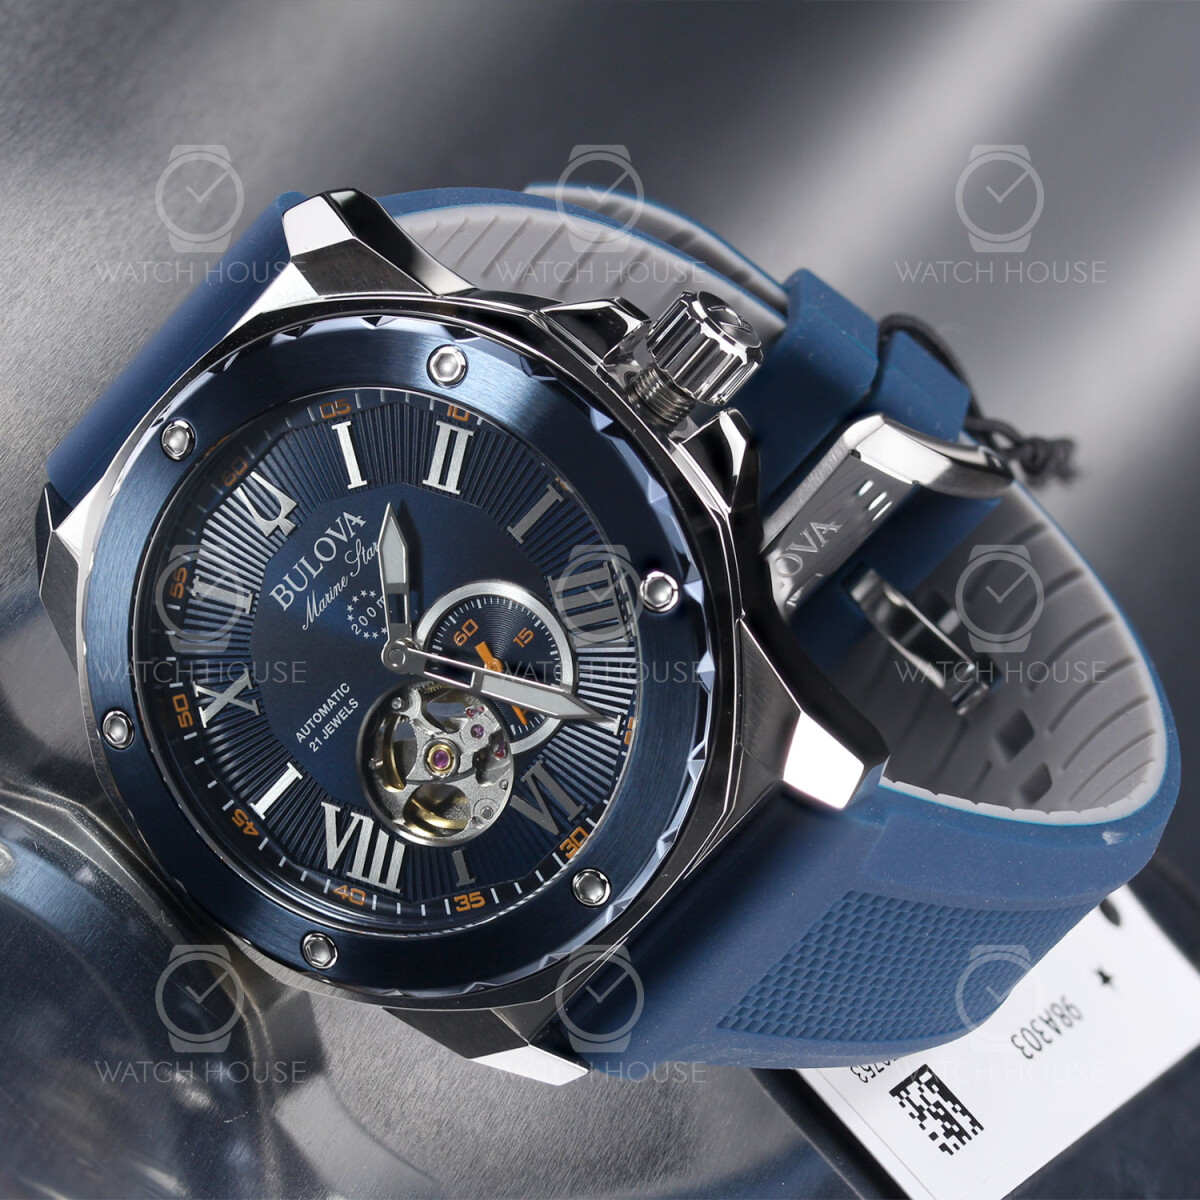 seconds 98A303 Automatic in Bulova navy blue decentralized Star Marine